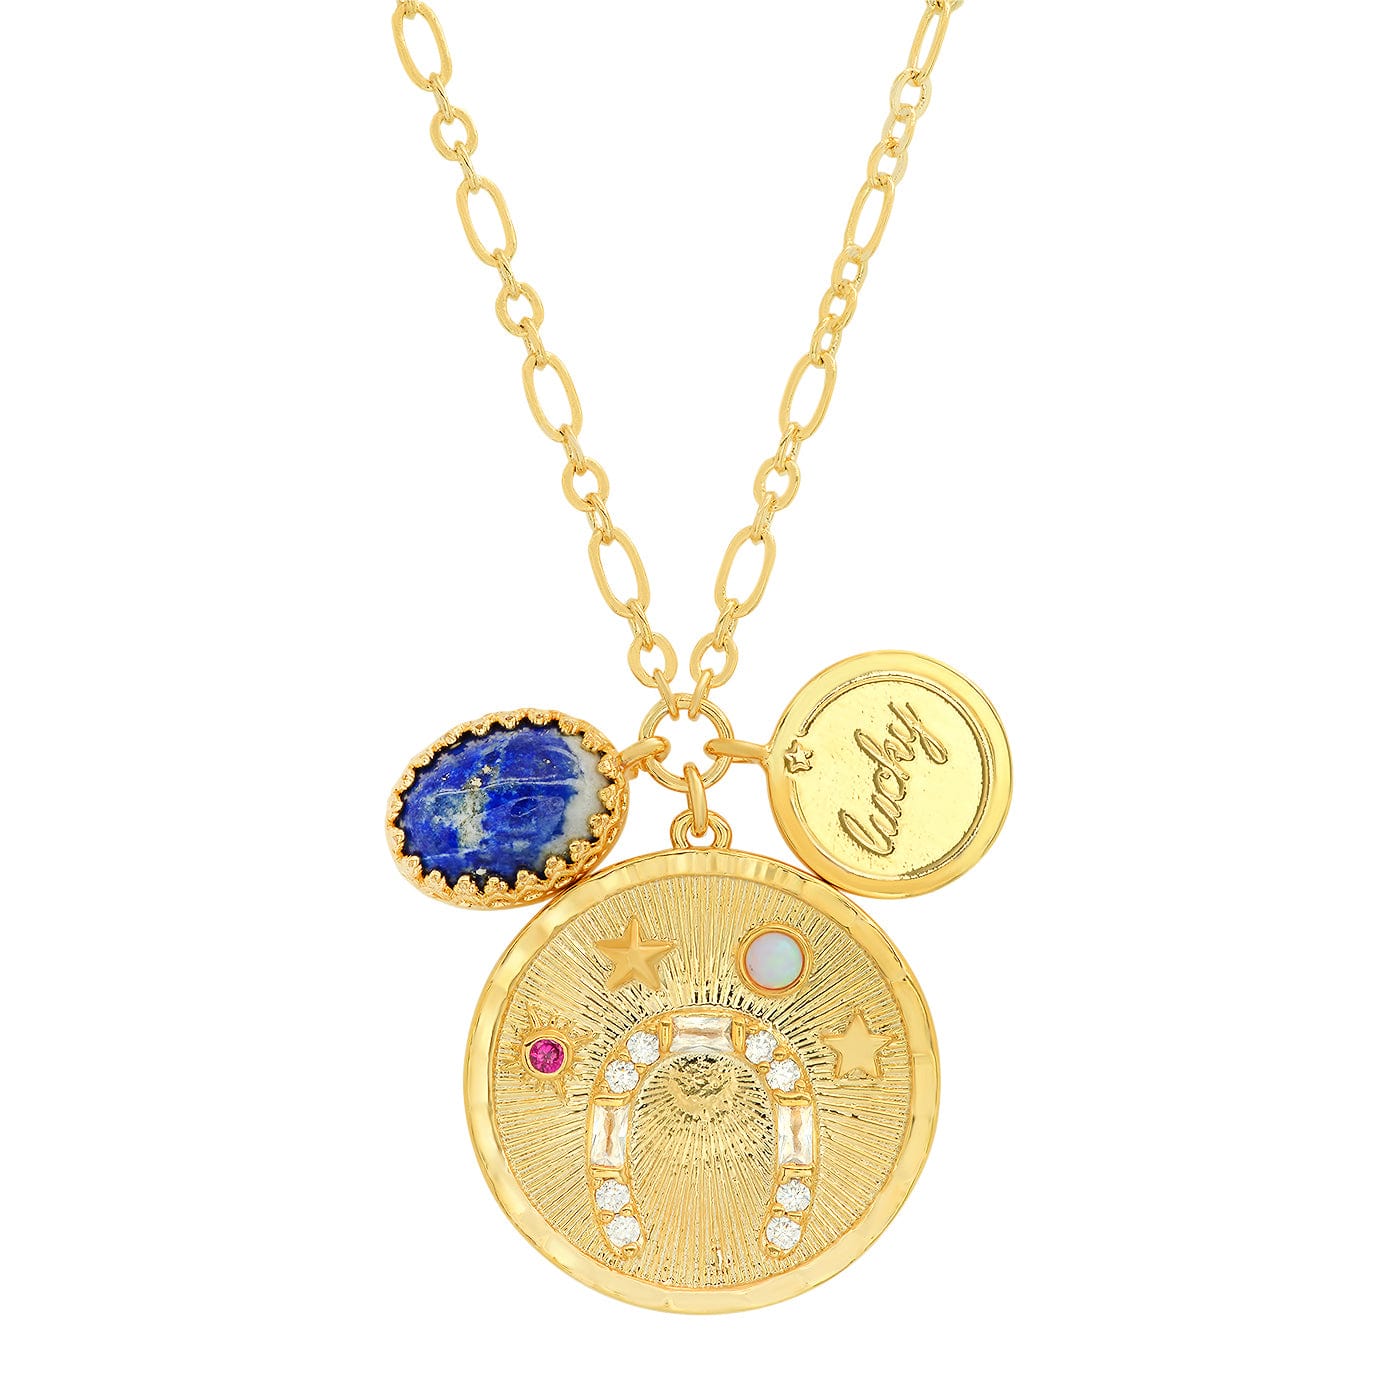 TAI JEWELRY Necklace Lucky Coin Pendant Charm Necklace